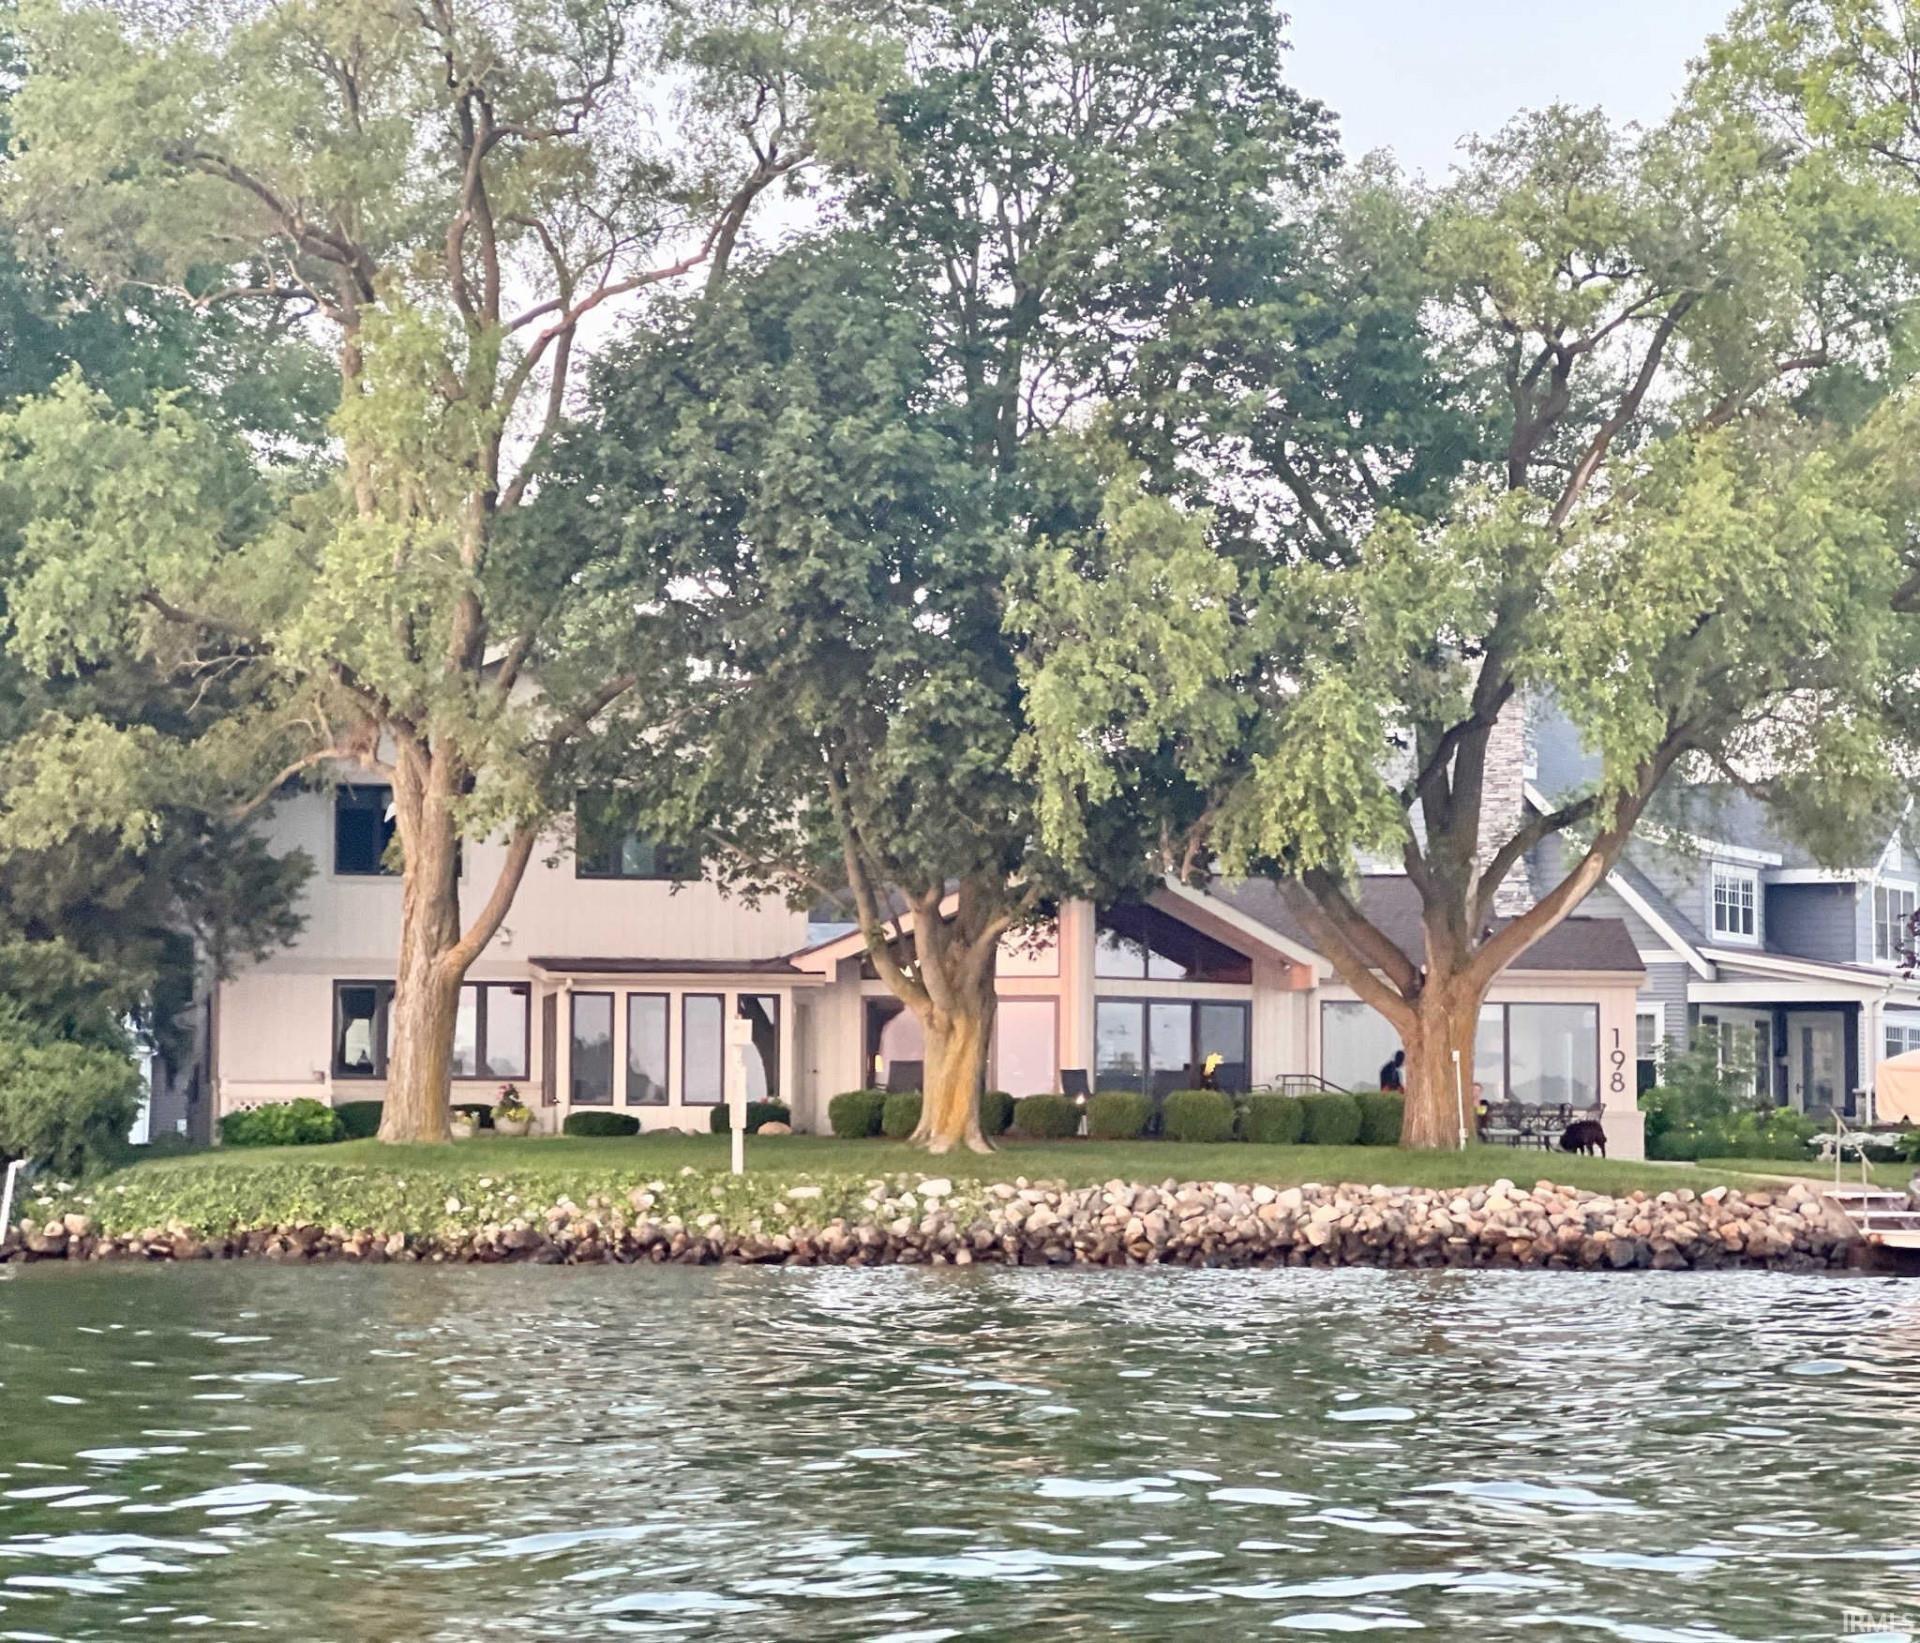 Welcome to a charming home located on Lake Wawasee, a 3,064 acre ski lake. This home features updated bathrooms and in 2023, new windows, flooring and paint. This home boasts a timeless design that exudes warmth and character. With 139 feet of lake frontage on a slight peninsula, this allows for a 270 degree view of the water. It is southwest facing and provides cool breezes and  sunsets, as well as unique privacy from neighbors.    The interior of the home is thoughtfully designed with a seamless flow between the living spaces. The main level features two living spaces, cozy dining area, well-appointed kitchen with modern appliances and primary suite.  Enjoy your favorite beverage in the all seasons room.  Upstairs, you will find 4 bedrooms, each offering ample light and closet space.  Two full bathrooms and a large storage room complete this area. This property includes a modern boathouse built on 20 feet of channel frontage behind the home. The lower level has two boat wells, and provides storage for water toys. The upstairs has a small living room, two bunk rooms and a full bath. This space can easily accommodate an additional 10 guests.    Outside, the property is surrounded by lush landscaping and mature trees, creating a serene oasis. The patio has been designed to take advantage of the view which could be argued as one of the best on Lake Wawasee.  If you know much about Wawasee, this is truly one of a kind.   Don't miss the opportunity to make this lovely property your new lake place for years to come!